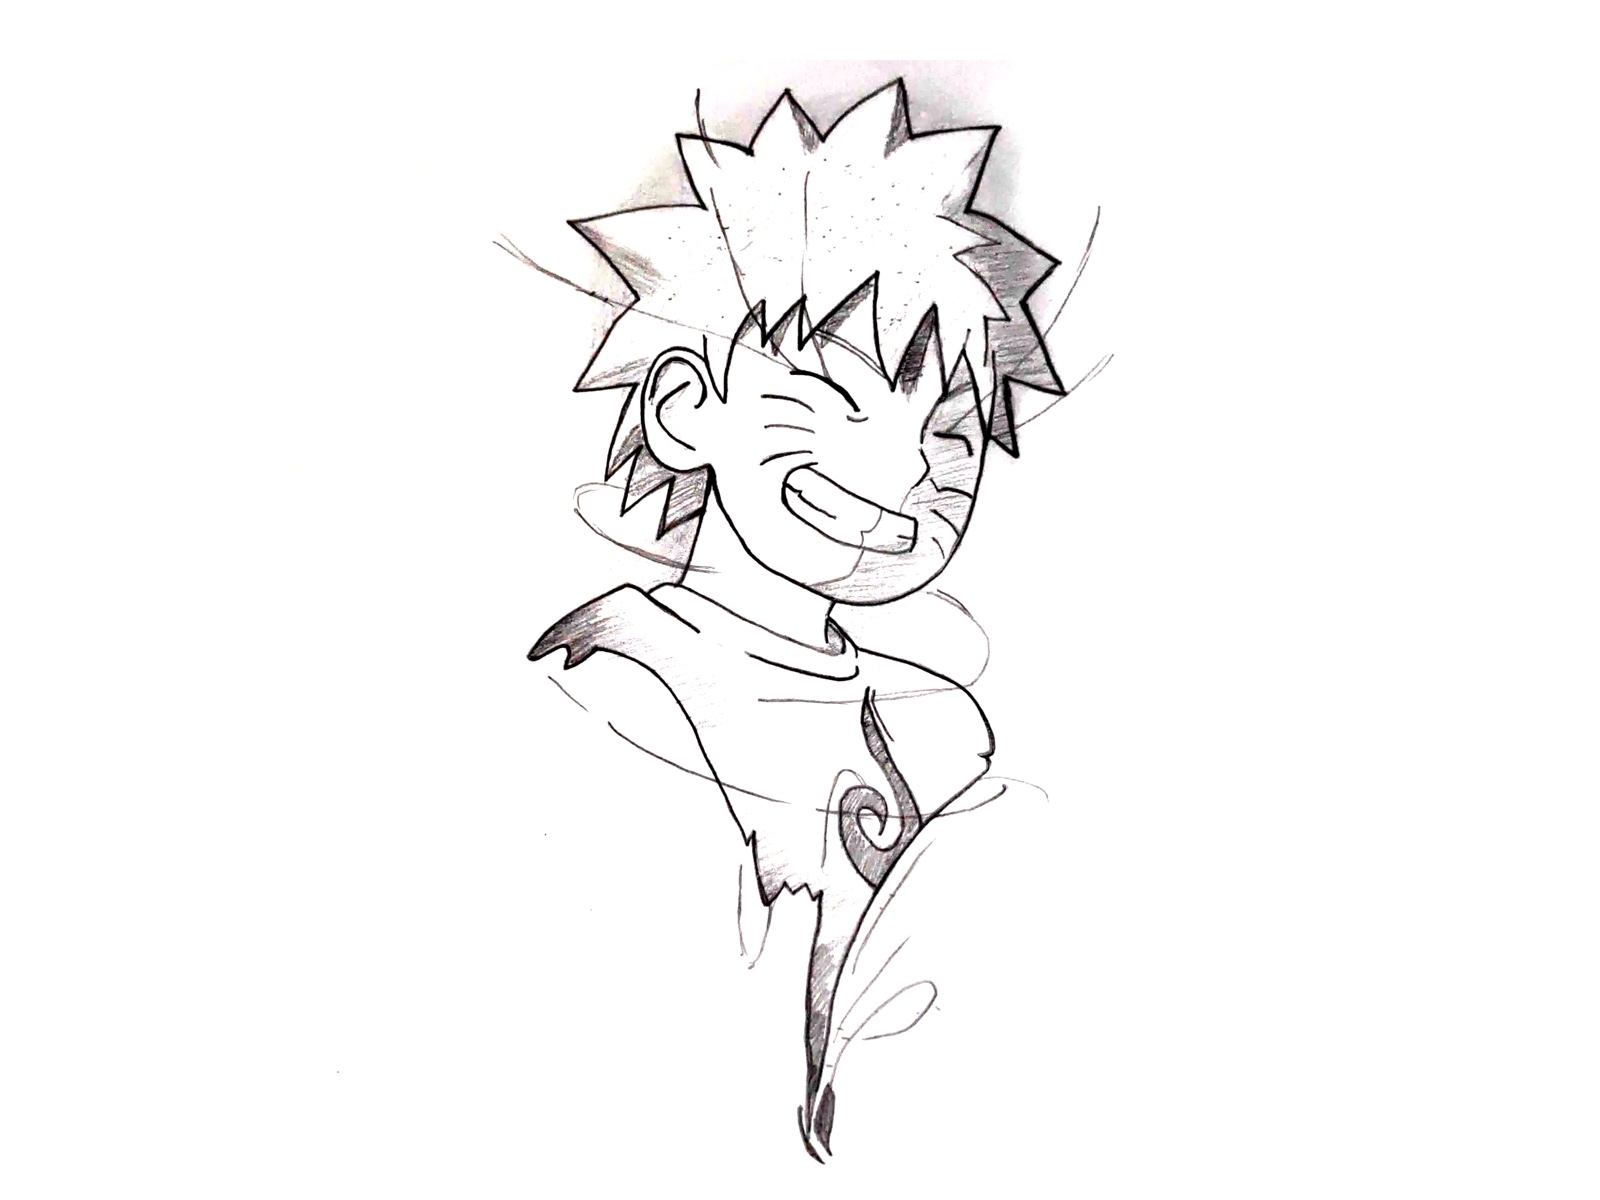 How to Draw Naruto Uzumaki with Easy Step by Step Drawing Instructions  Tutorial  Page 2 of 3  How to Draw Step by Step Drawing Tutorials